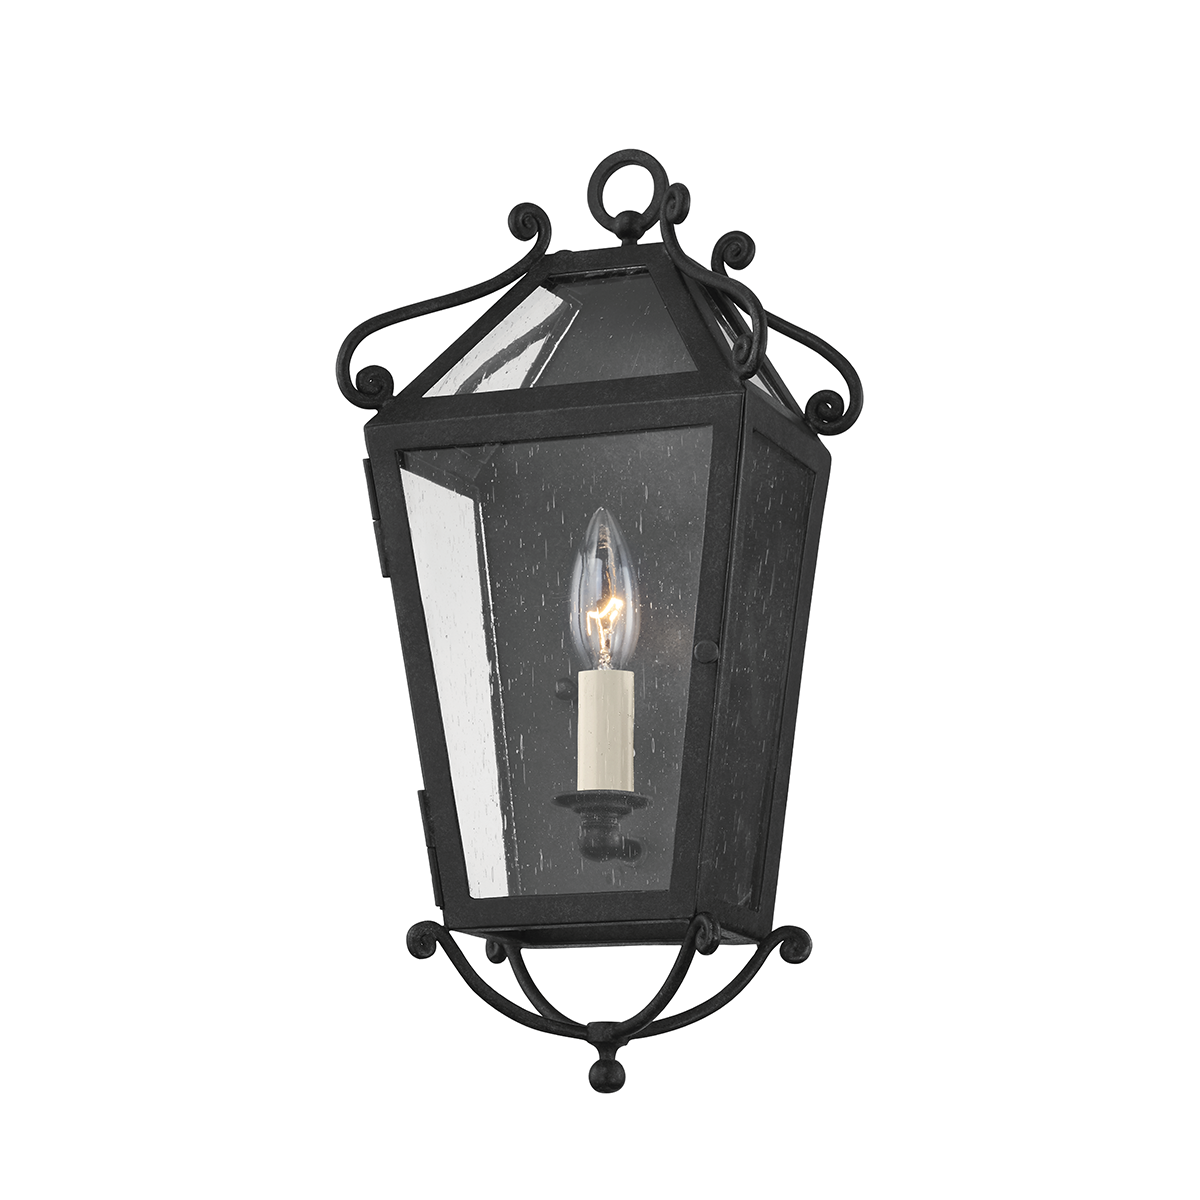 Troy Lighting 1 LIGHT SMALL EXTERIOR WALL SCONCE B4121